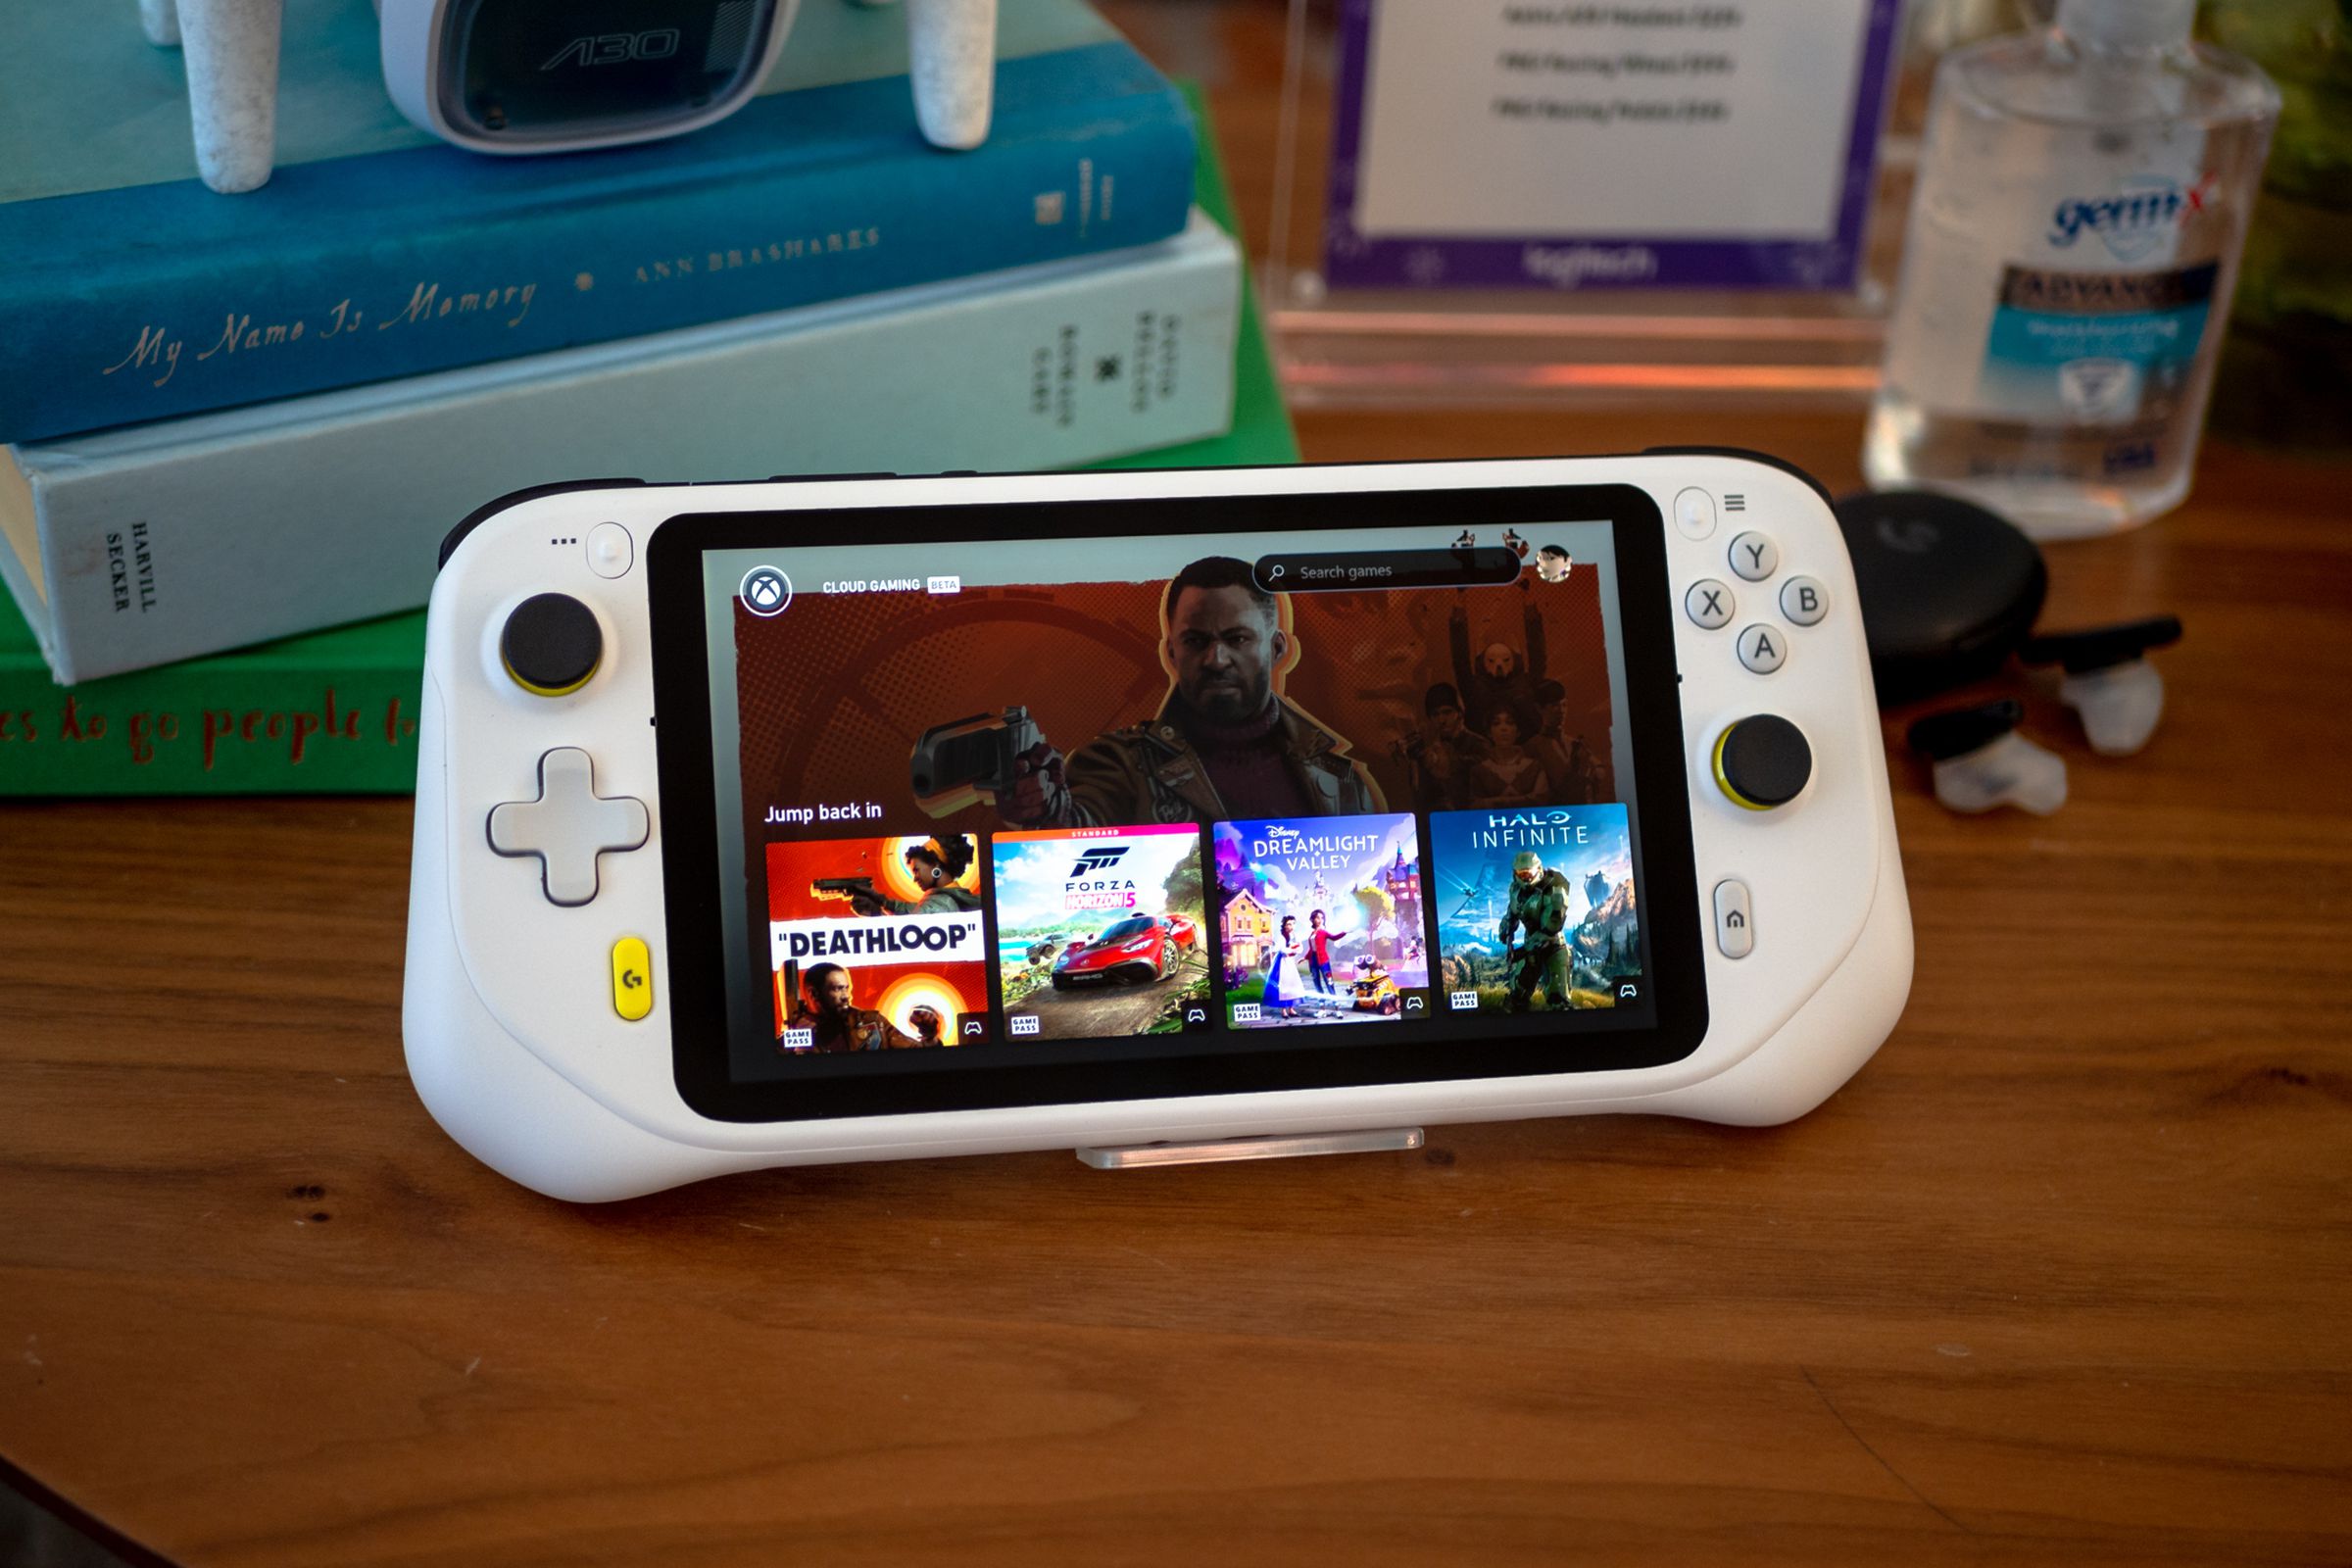 Logitech’s G Cloud Gaming Handheld sitting on a wooden table, displaying the user interface of the Xbox Cloud Gaming app.